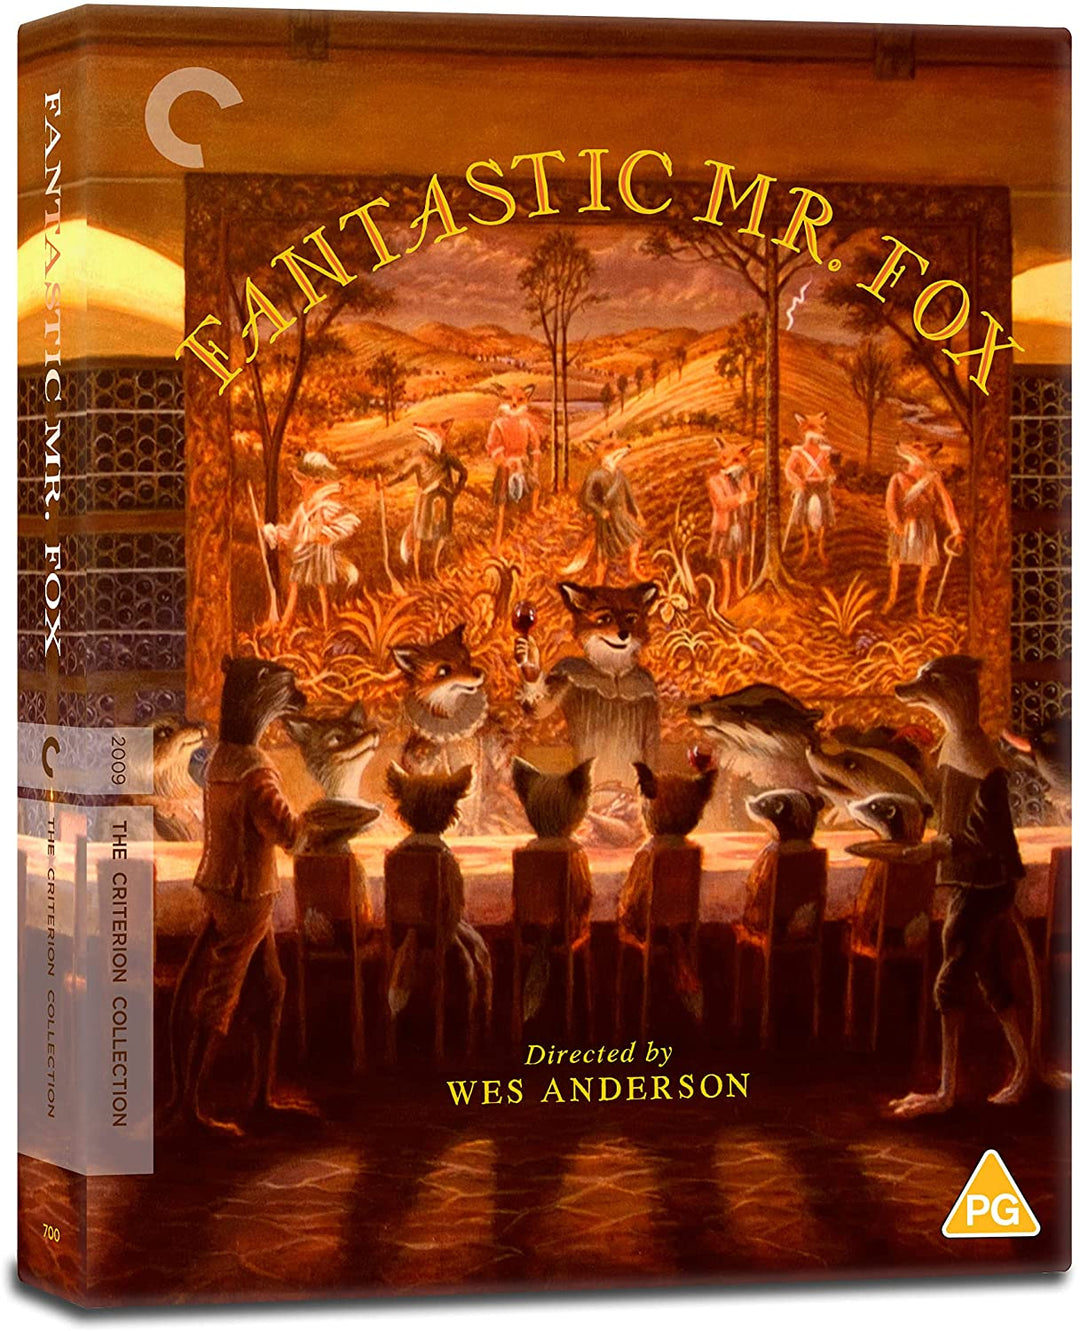 The Fantastic Mr. Fox (2009) (Criterion Collection) UK Only [Blu-ray]